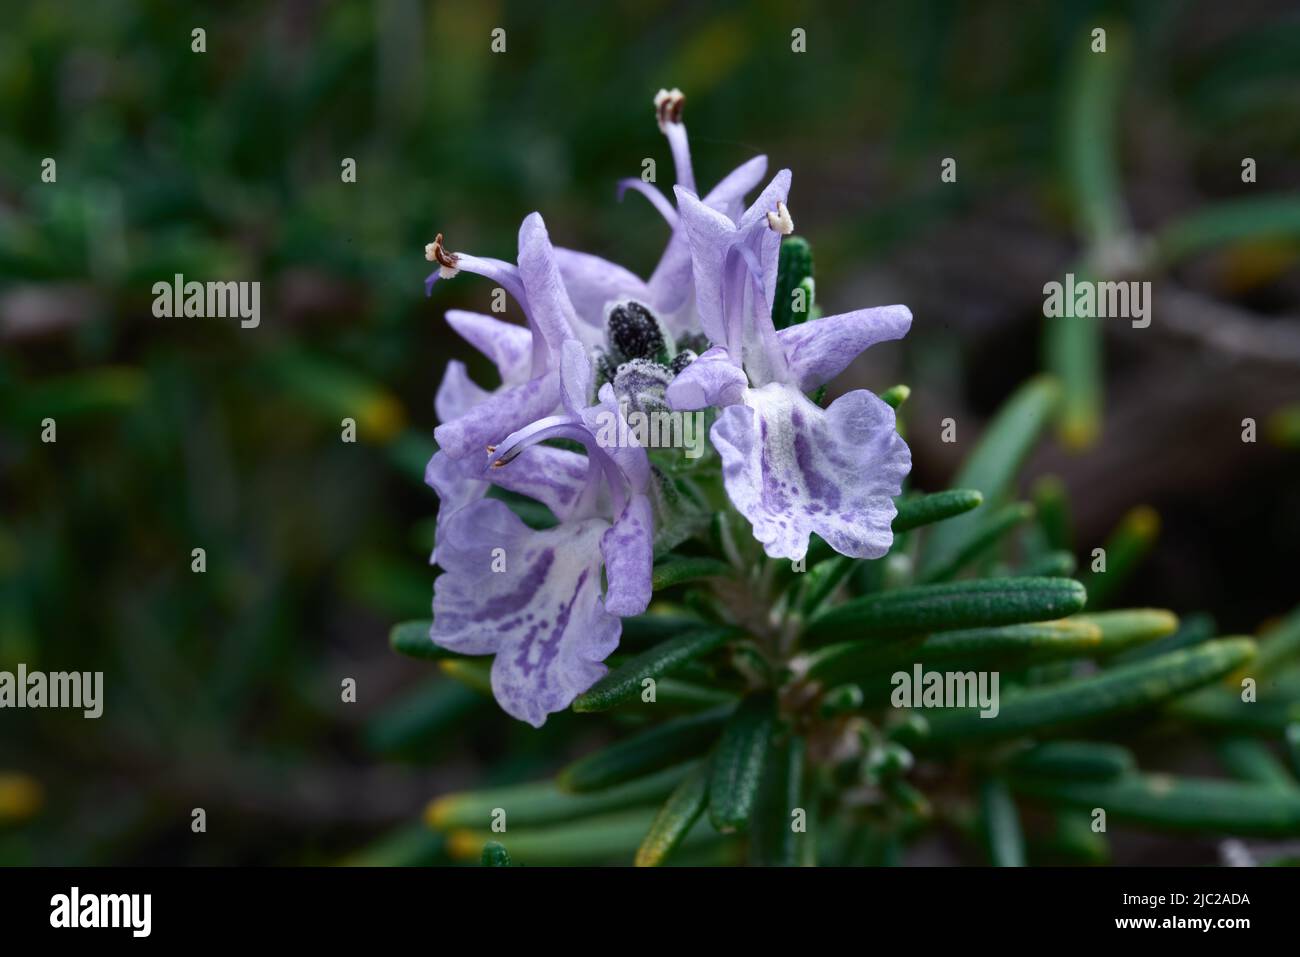 Flower of the rosemary plant that is also known as Salvia rosmarinus Stock Photo